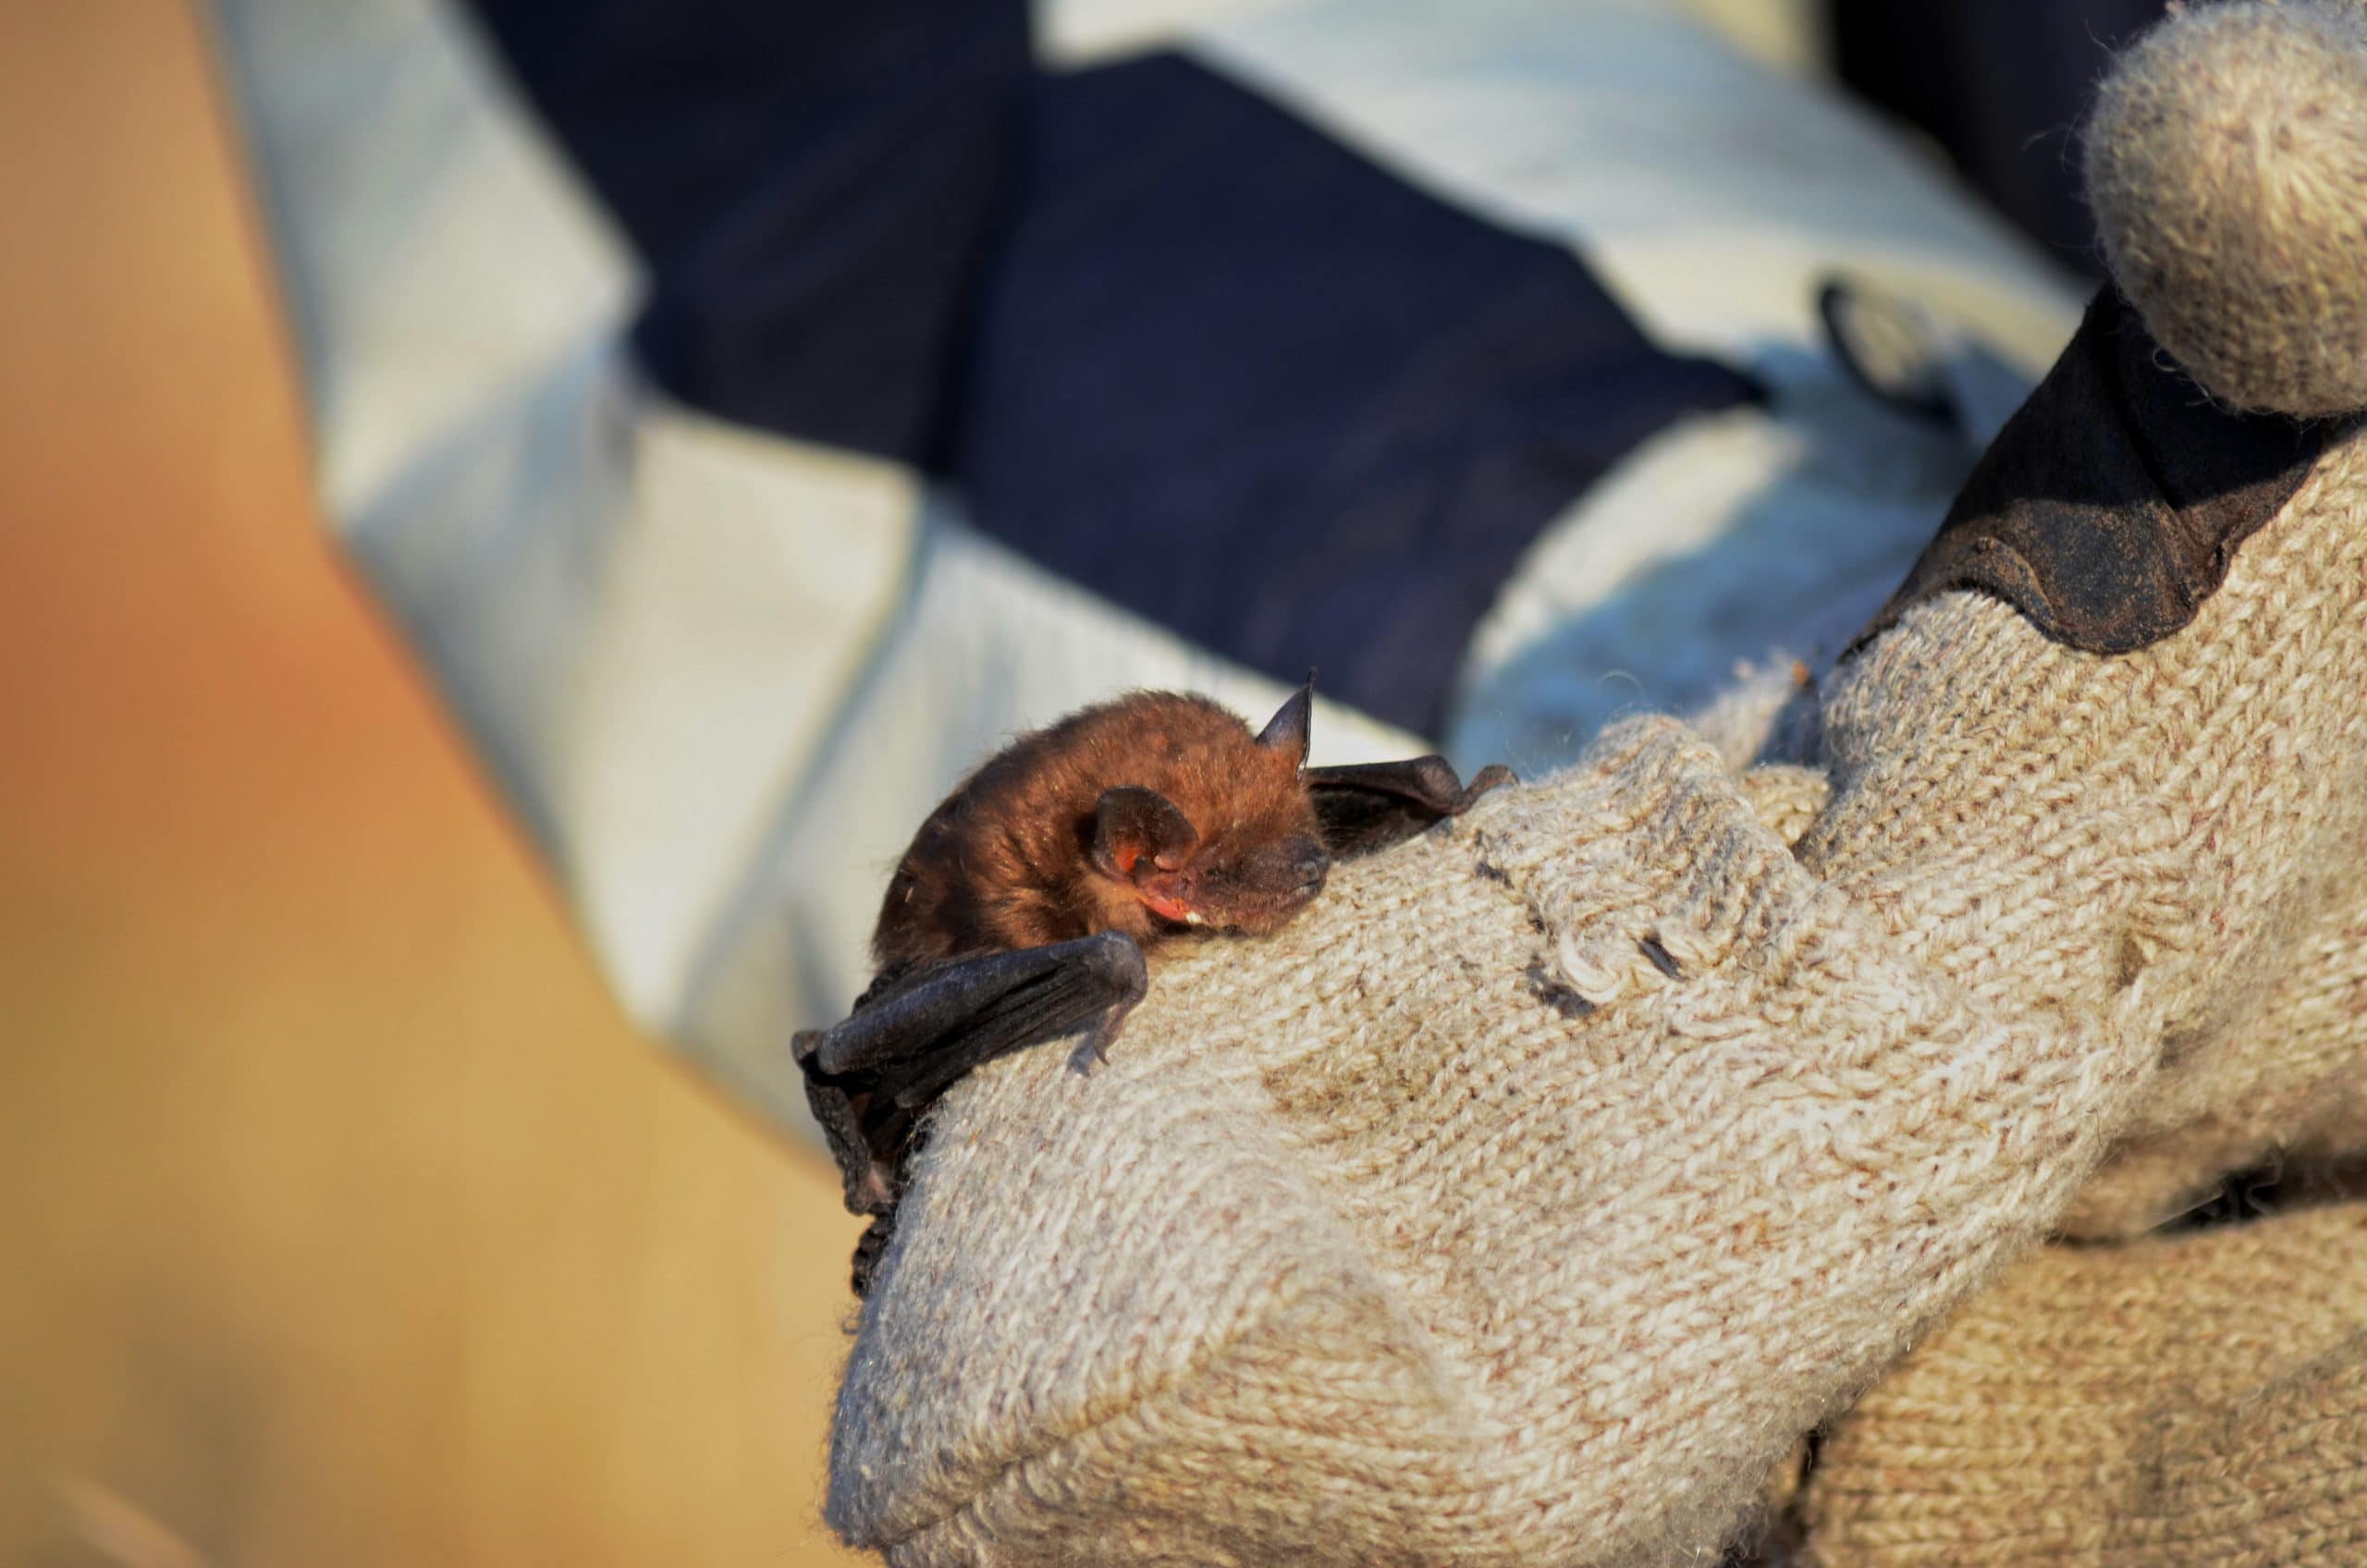 Rescued Big Brown Bat from home